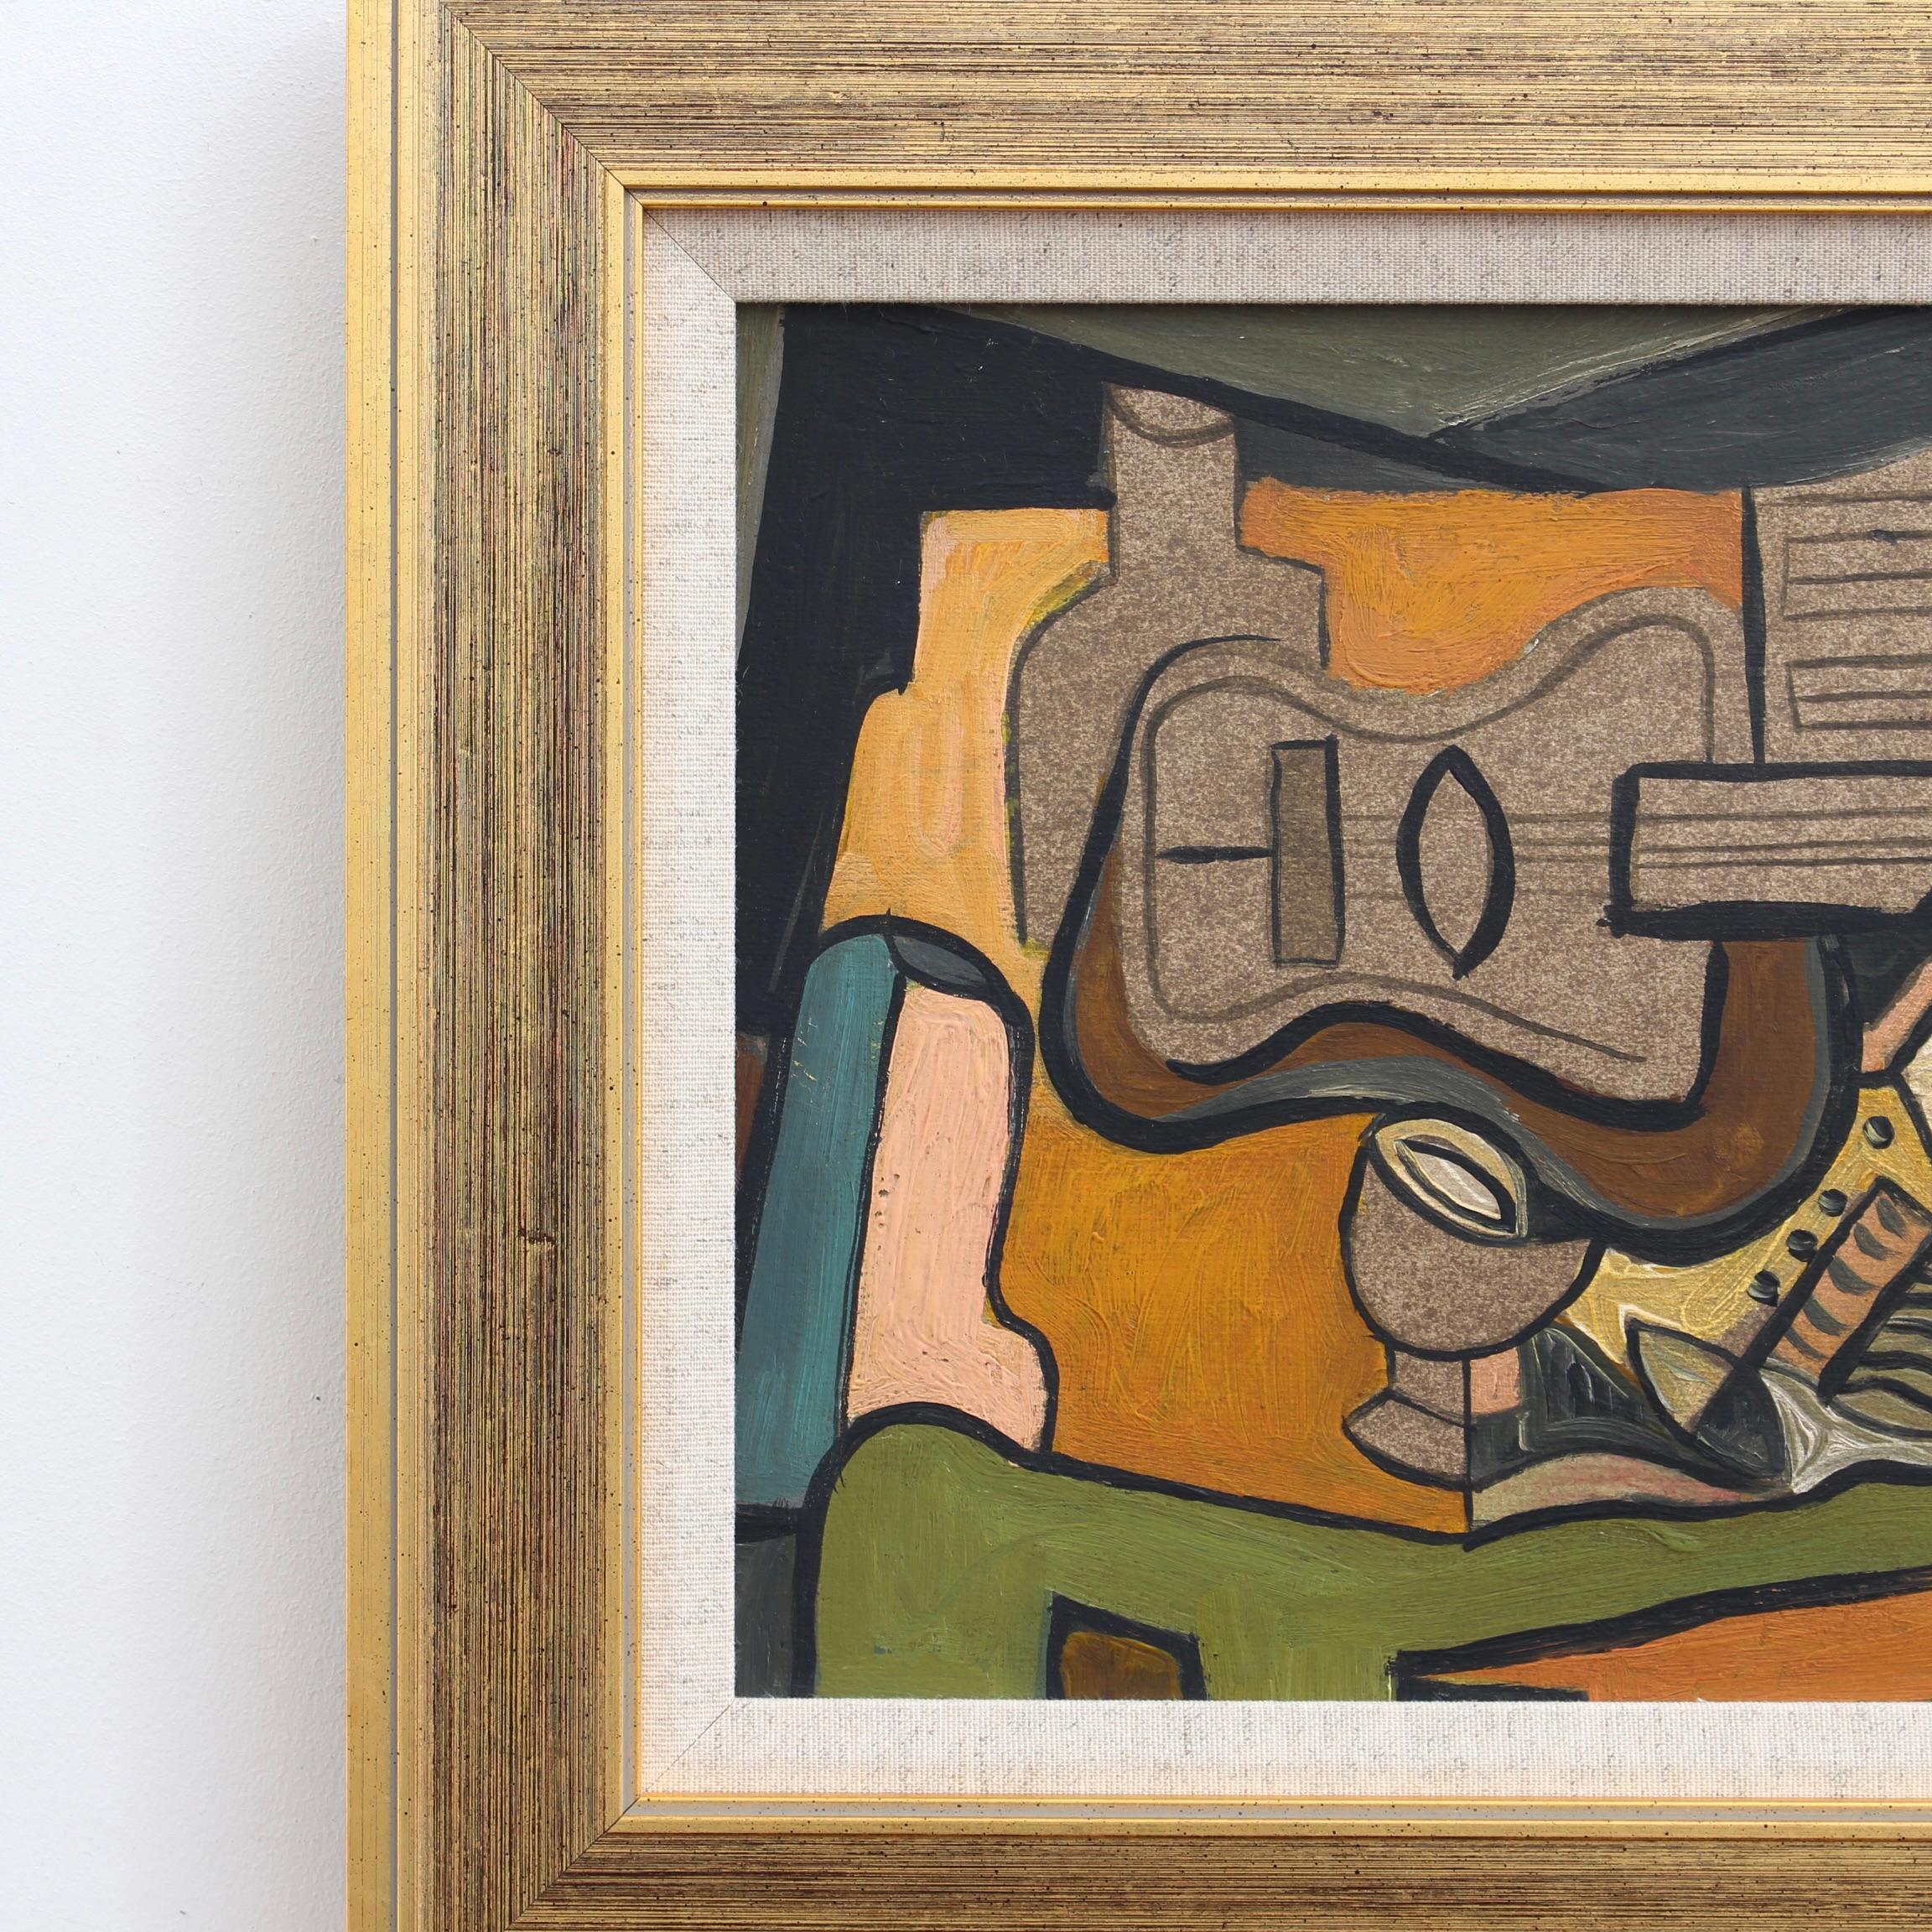 'Symphony of Colour: Cubist Still Life with Guitar and Wine', oil on board, Berlin School, initialed 'M.V.' (circa 1960s). This artwork is a clear cubist homage to one of the founders of the movement, Juan Gris (1887-1927). Cubism started with